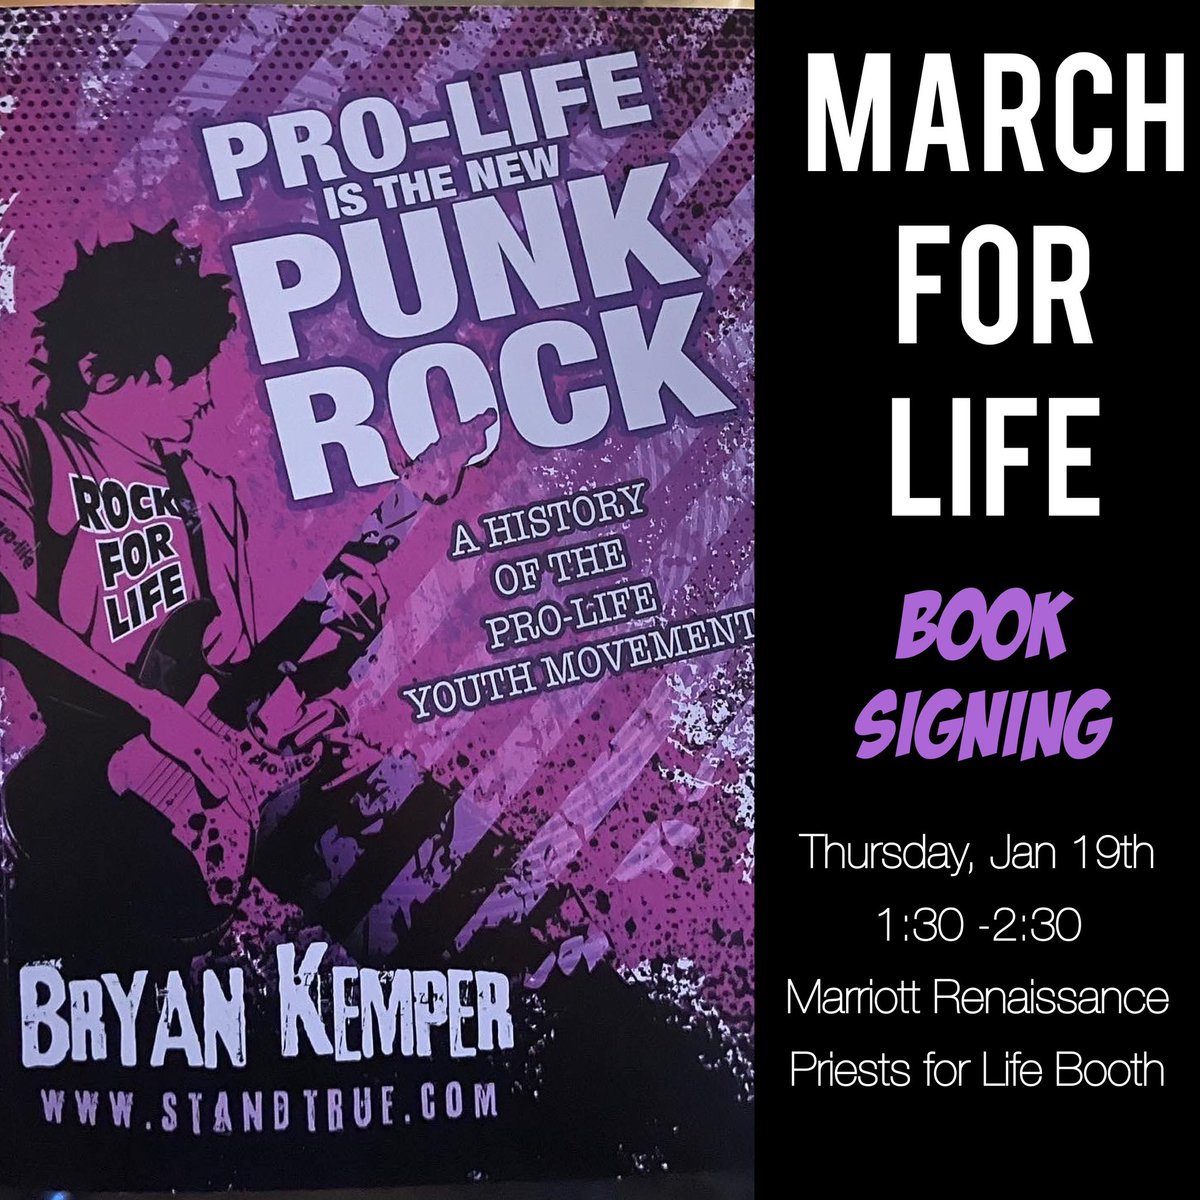 Friends if you will be at the March for Life I’ll be doing a book signing at the Priests for Life booth on Thursday from 1:30 - 2:30 at the Marriott Renaissance. Even if you don’t want a copy of my new book “Pro-life is the New Punk Rock”, come say hi. #whywemarch #whyimarch